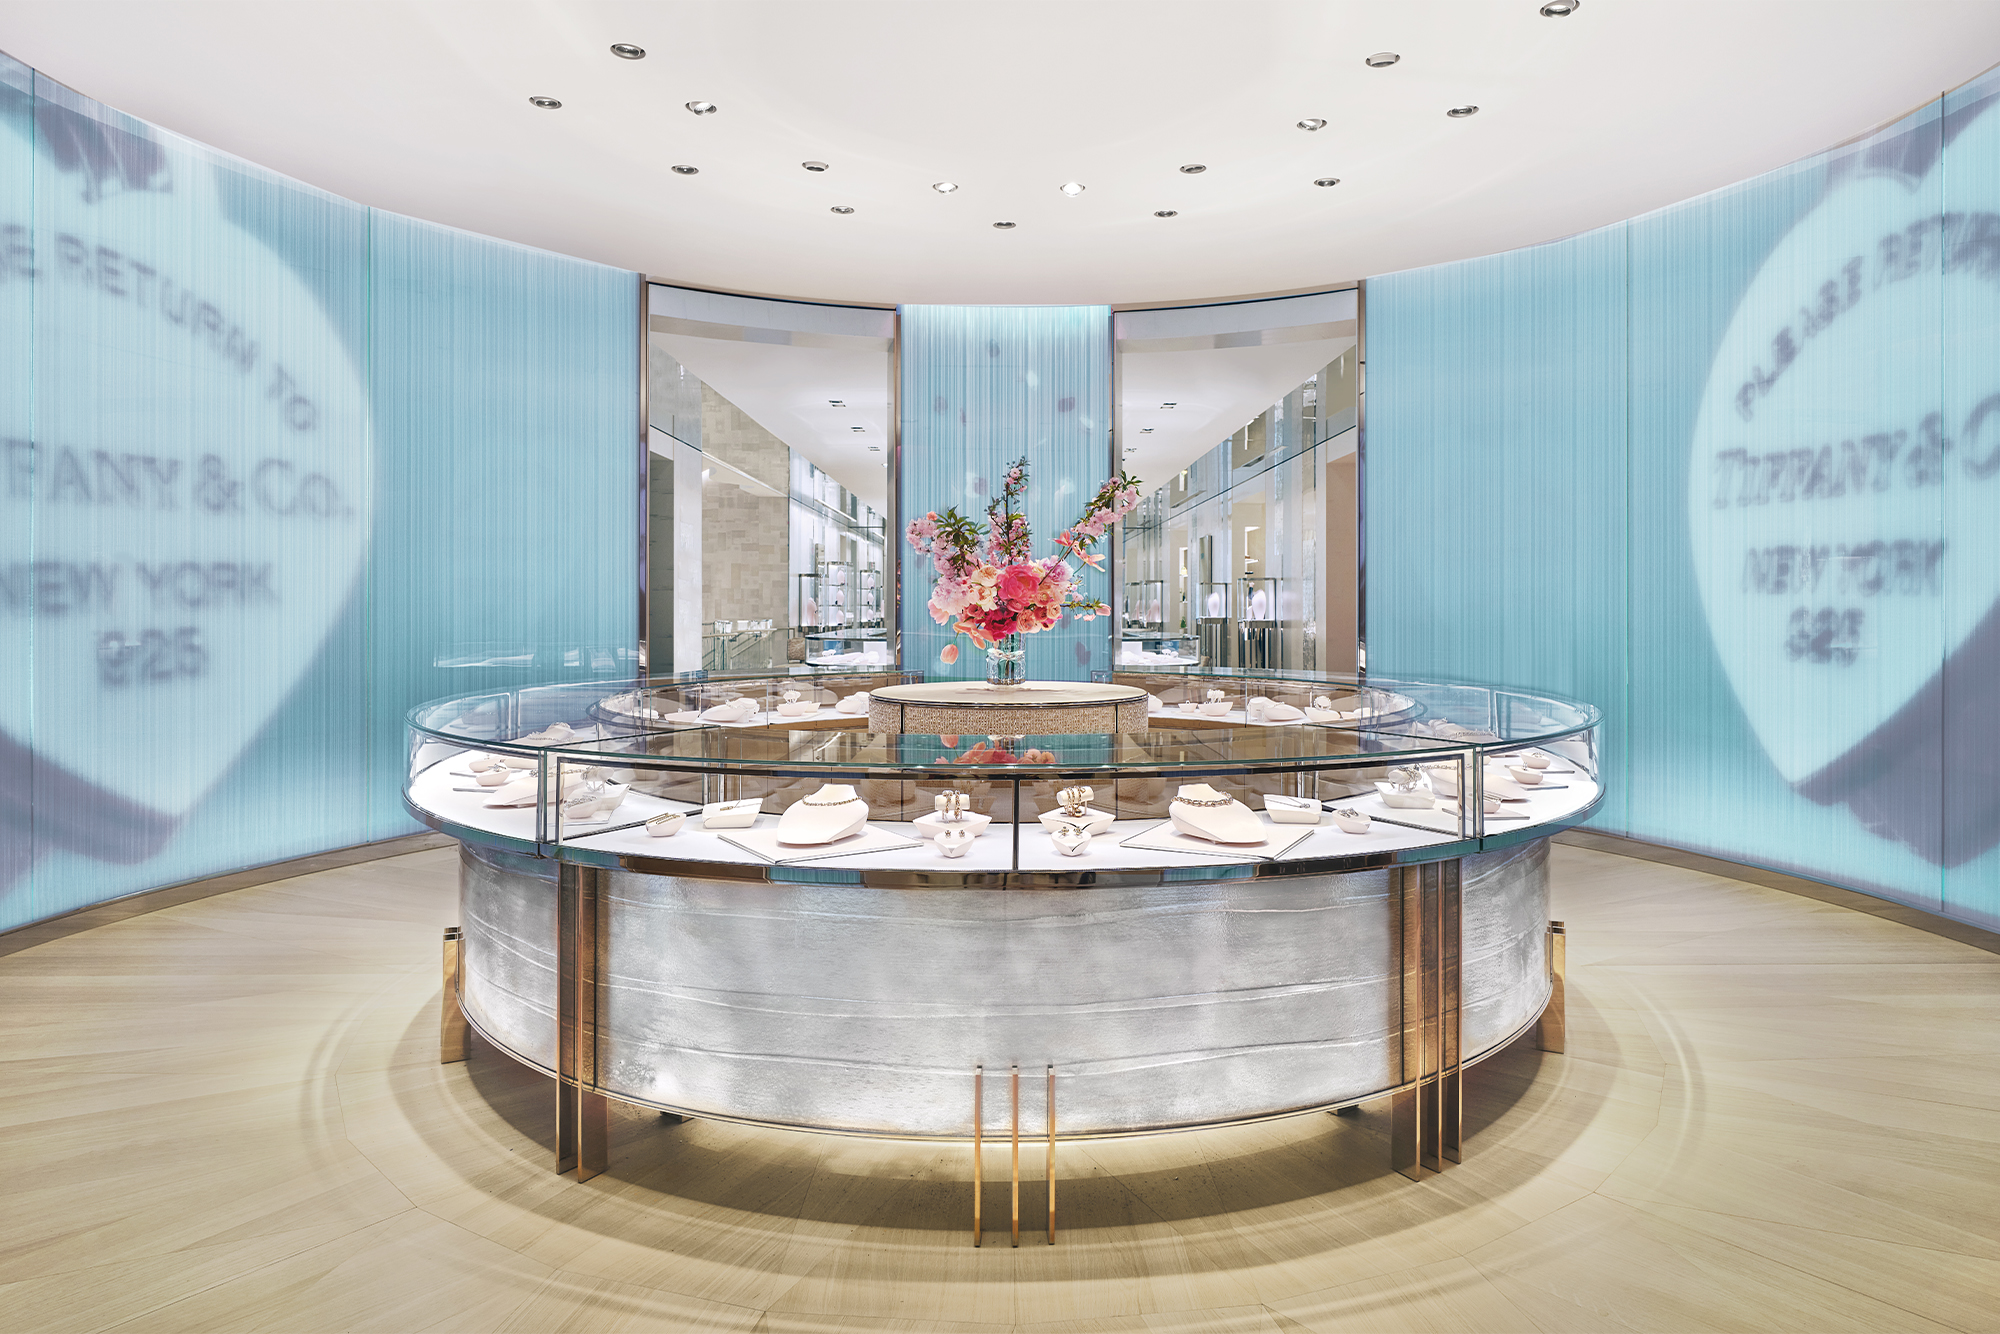 Tiffany & Co. The Landmark interior curved with blue wall and circular table